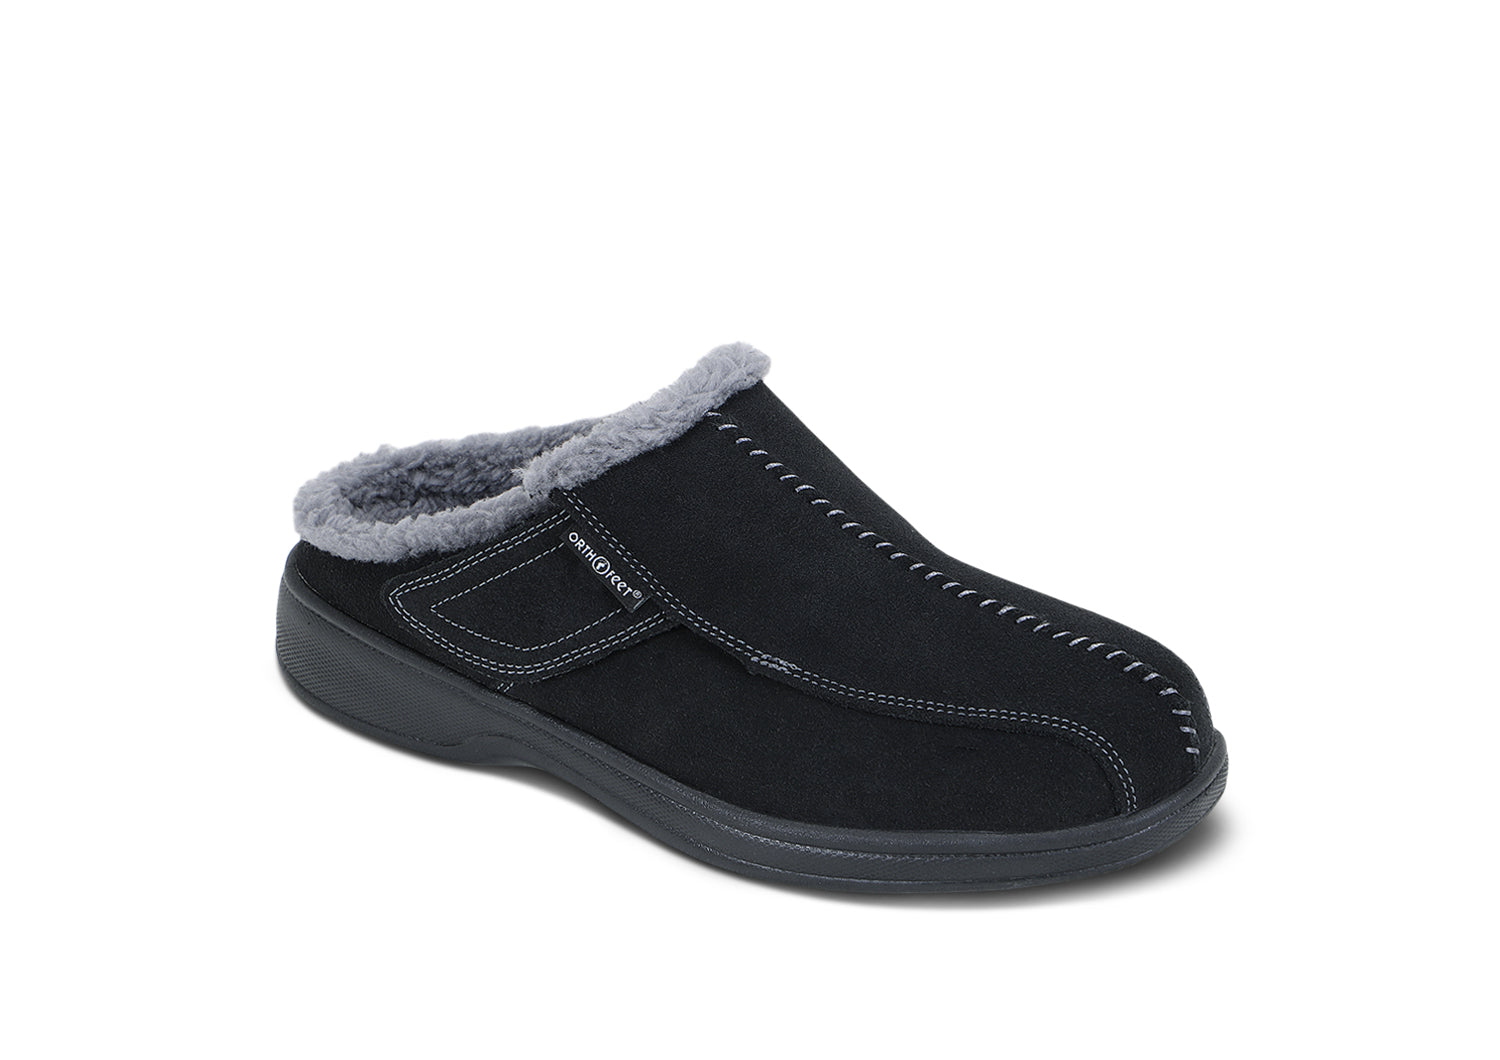 Buy AirBlue Slippers - Men's Ortho Slipper Soft Casual/Home/Leg Pain (Blue,  Numeric_7) at Amazon.in